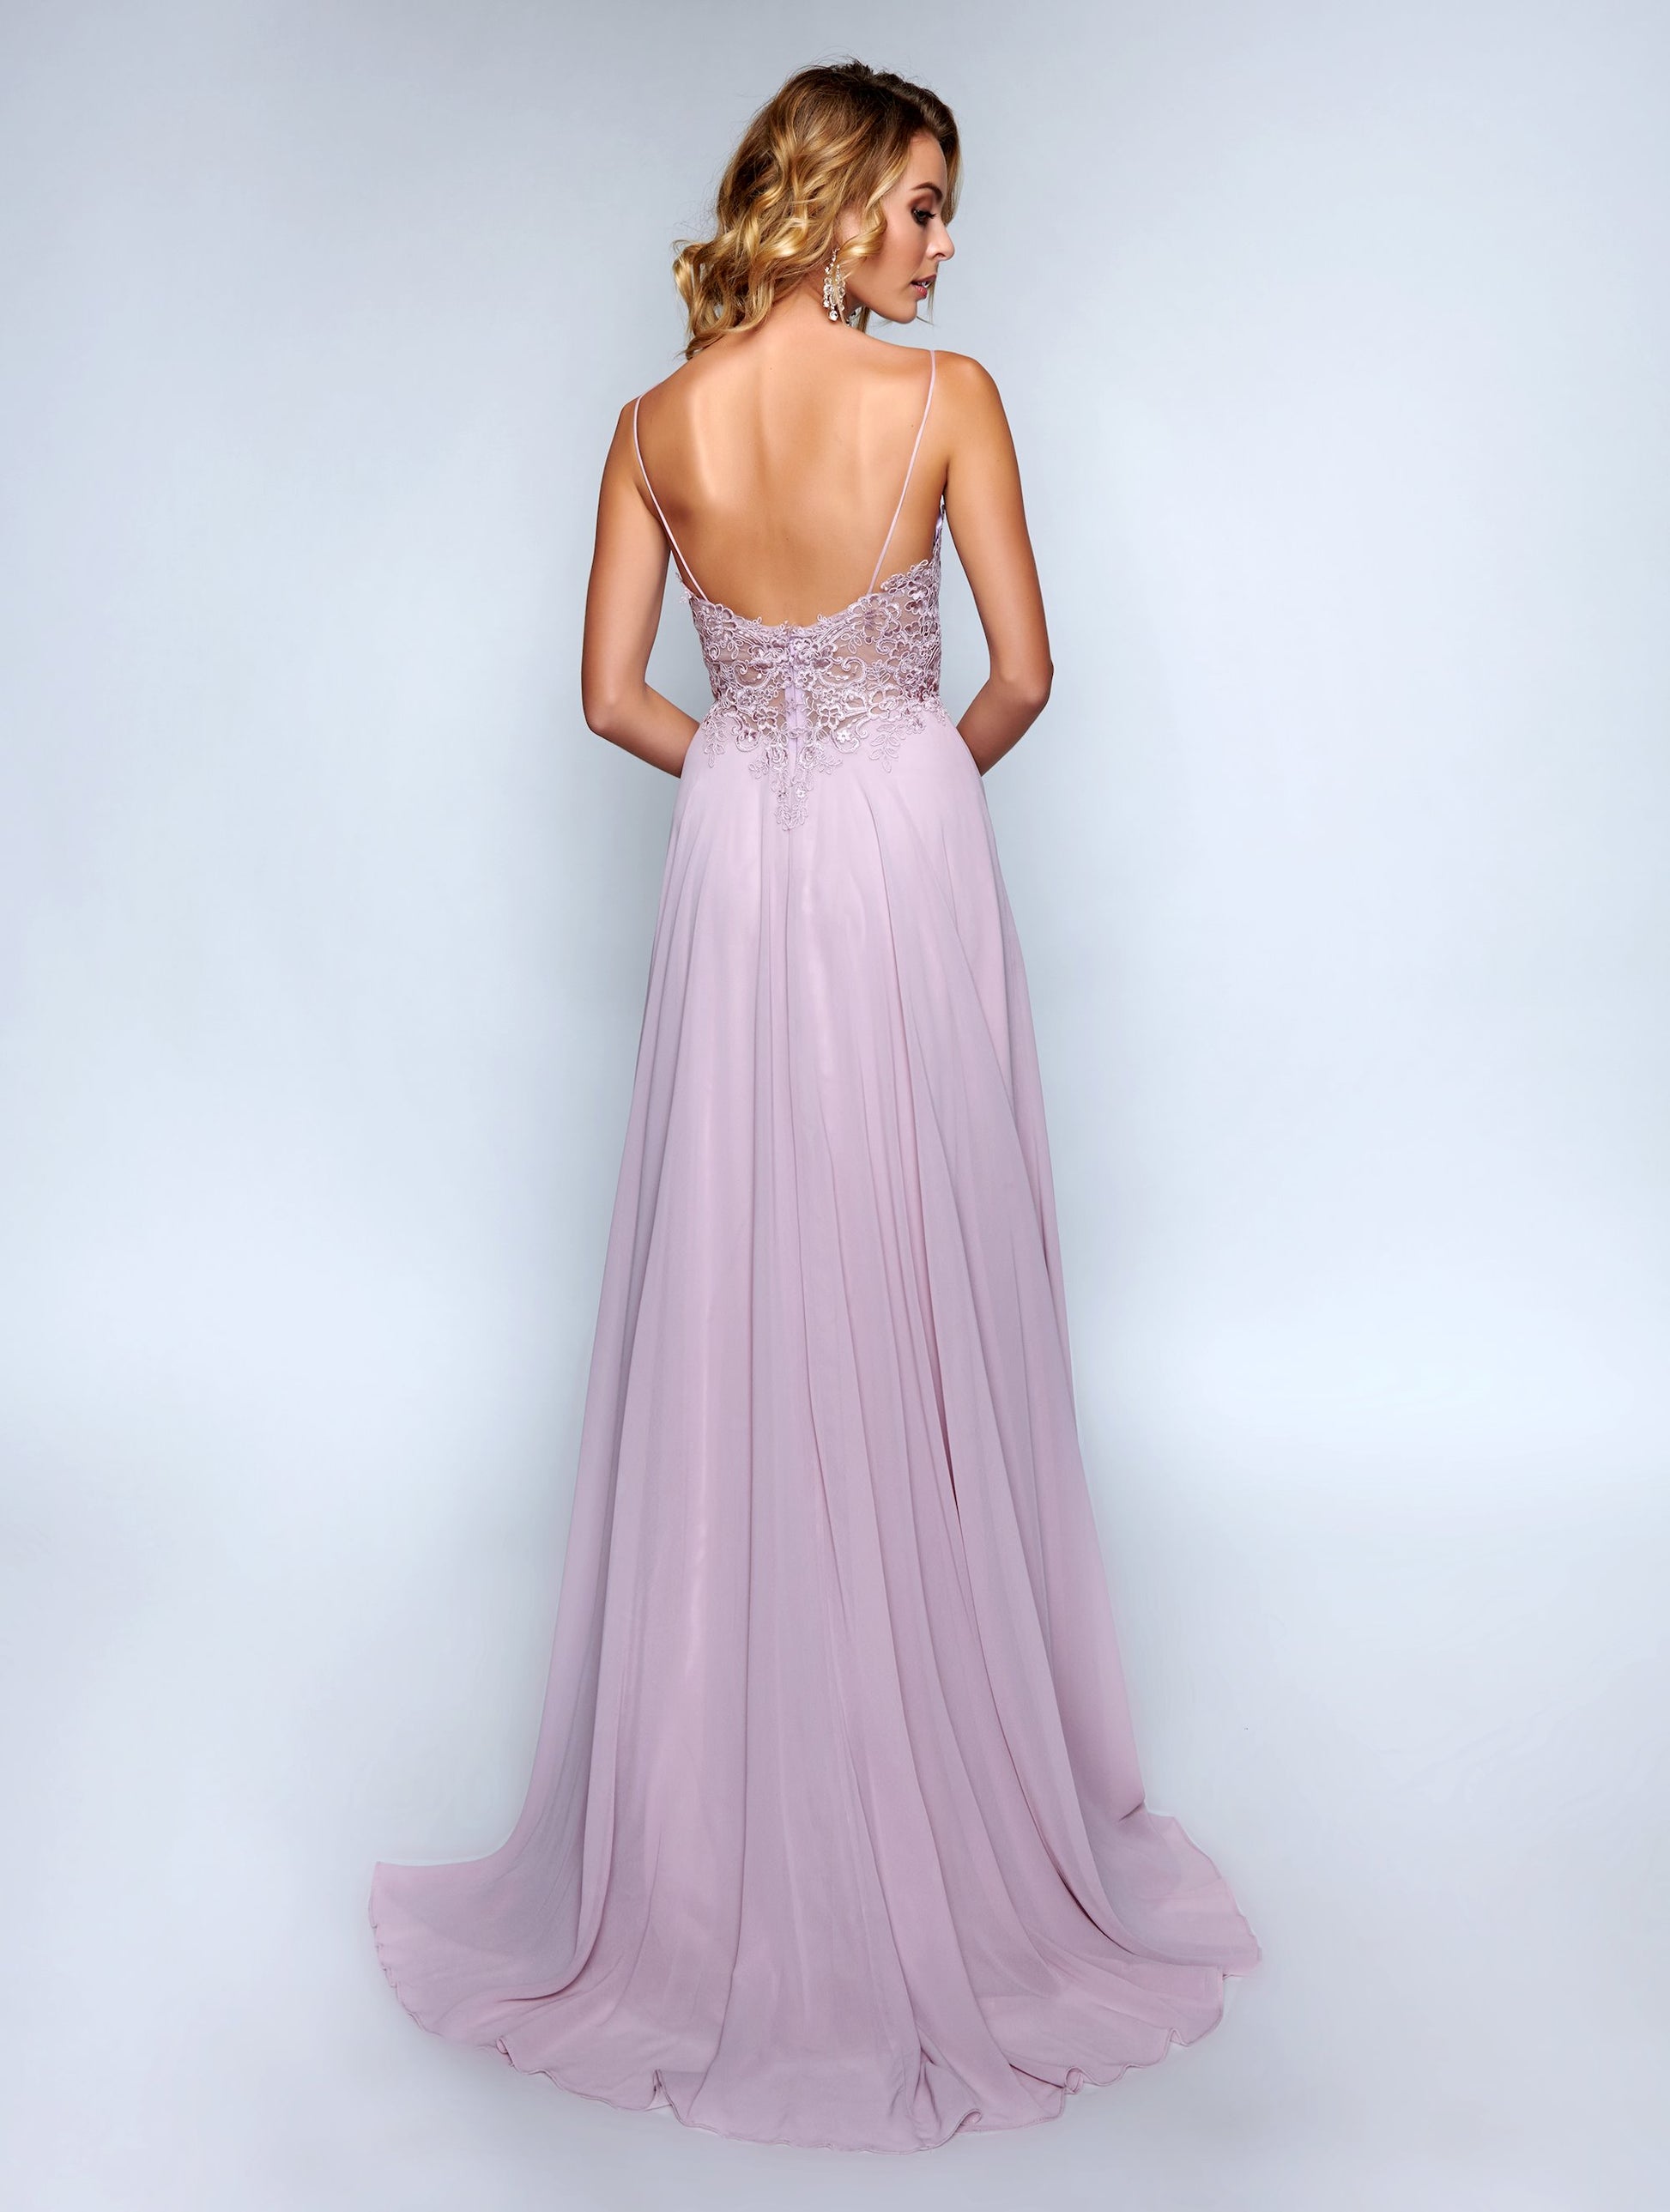 Nina Canacci 3153 Plum size 4 This is a long flowy prom dress with a lace bodice v neckline. Perfect for wedding guest, bridesmaid, maid of honor or mother of bride or groom dress.  Also makes a nice choice for spring formal dance or other social events.  Color Plum  Size 4